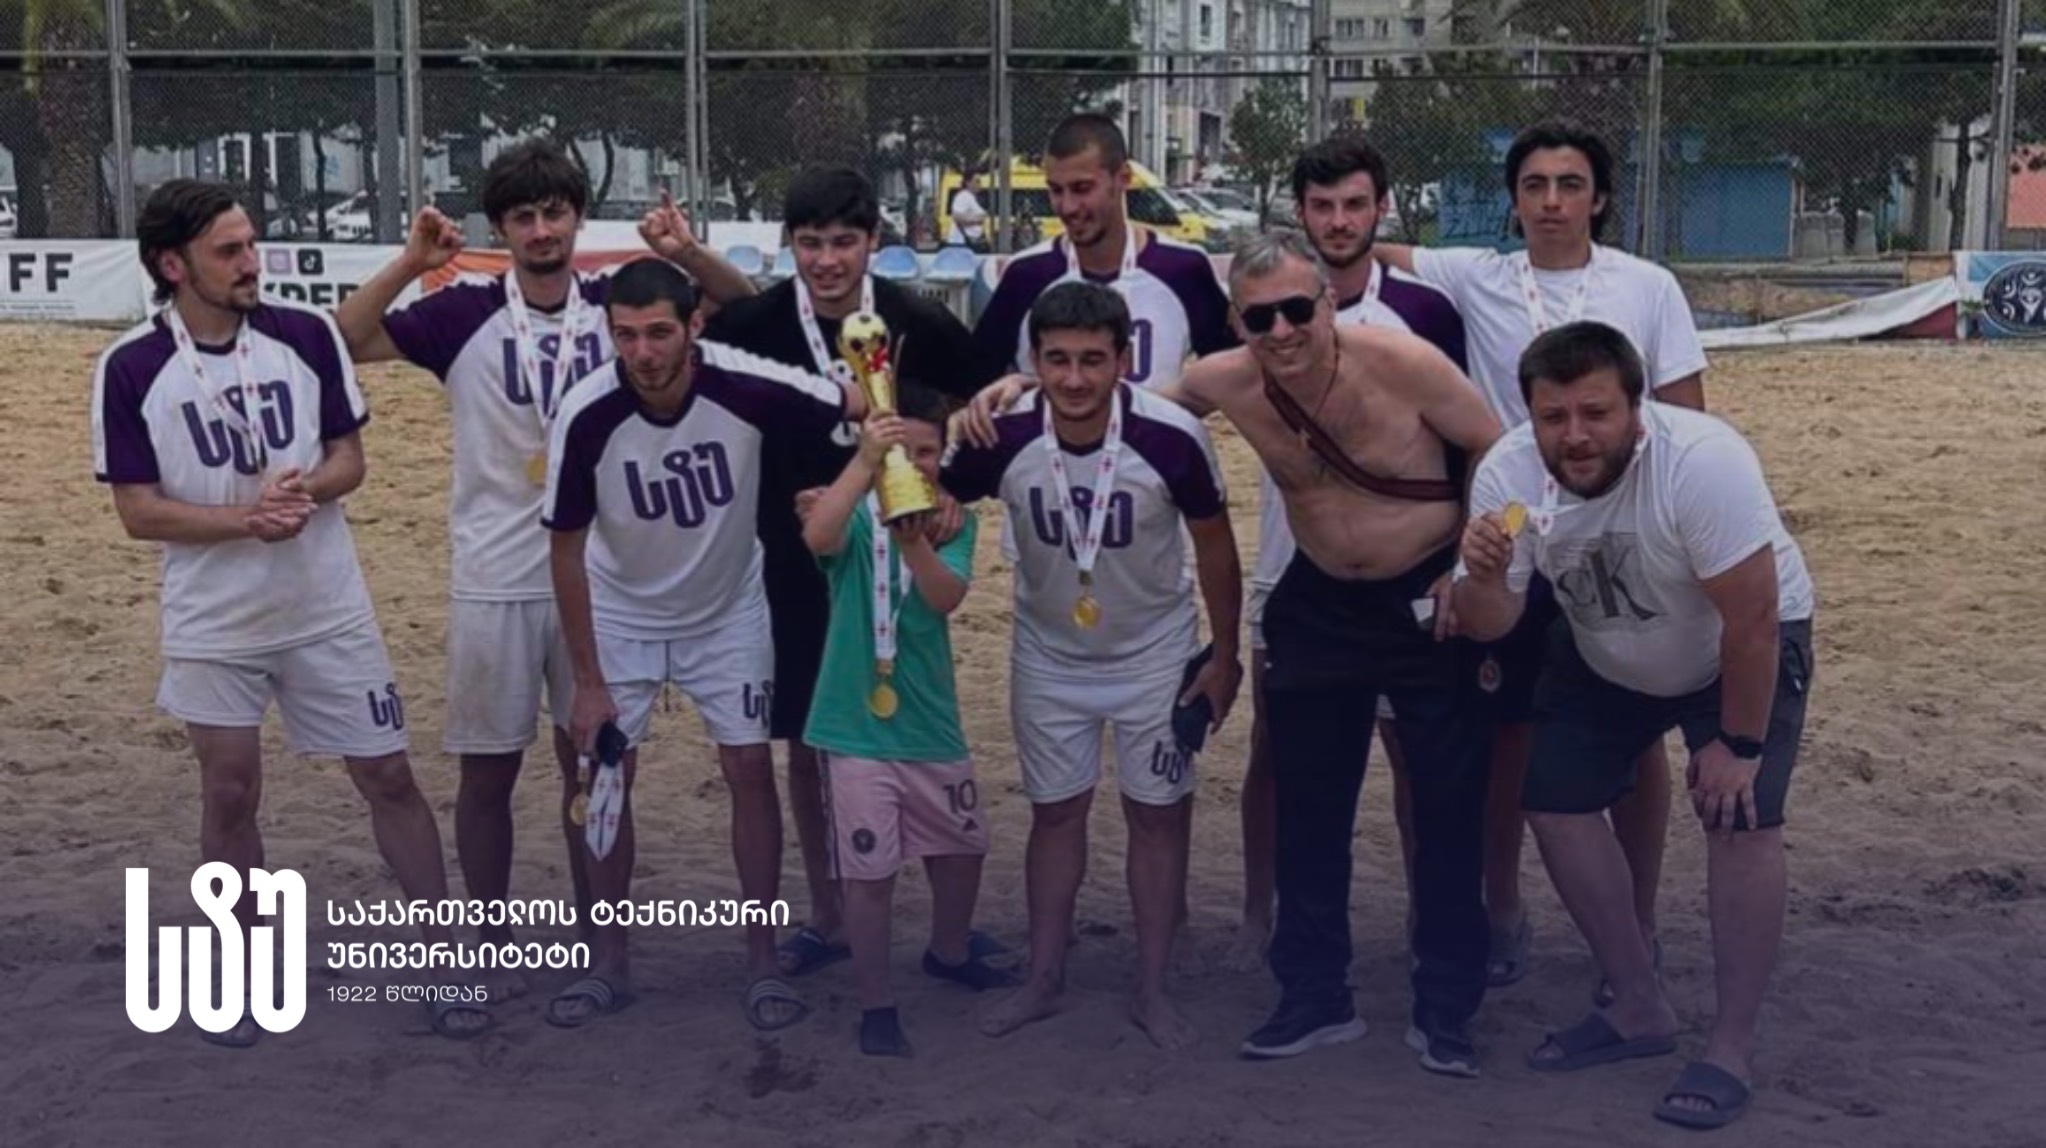 The GTU team won the Summer Universiada Gold Cup in sand soccer